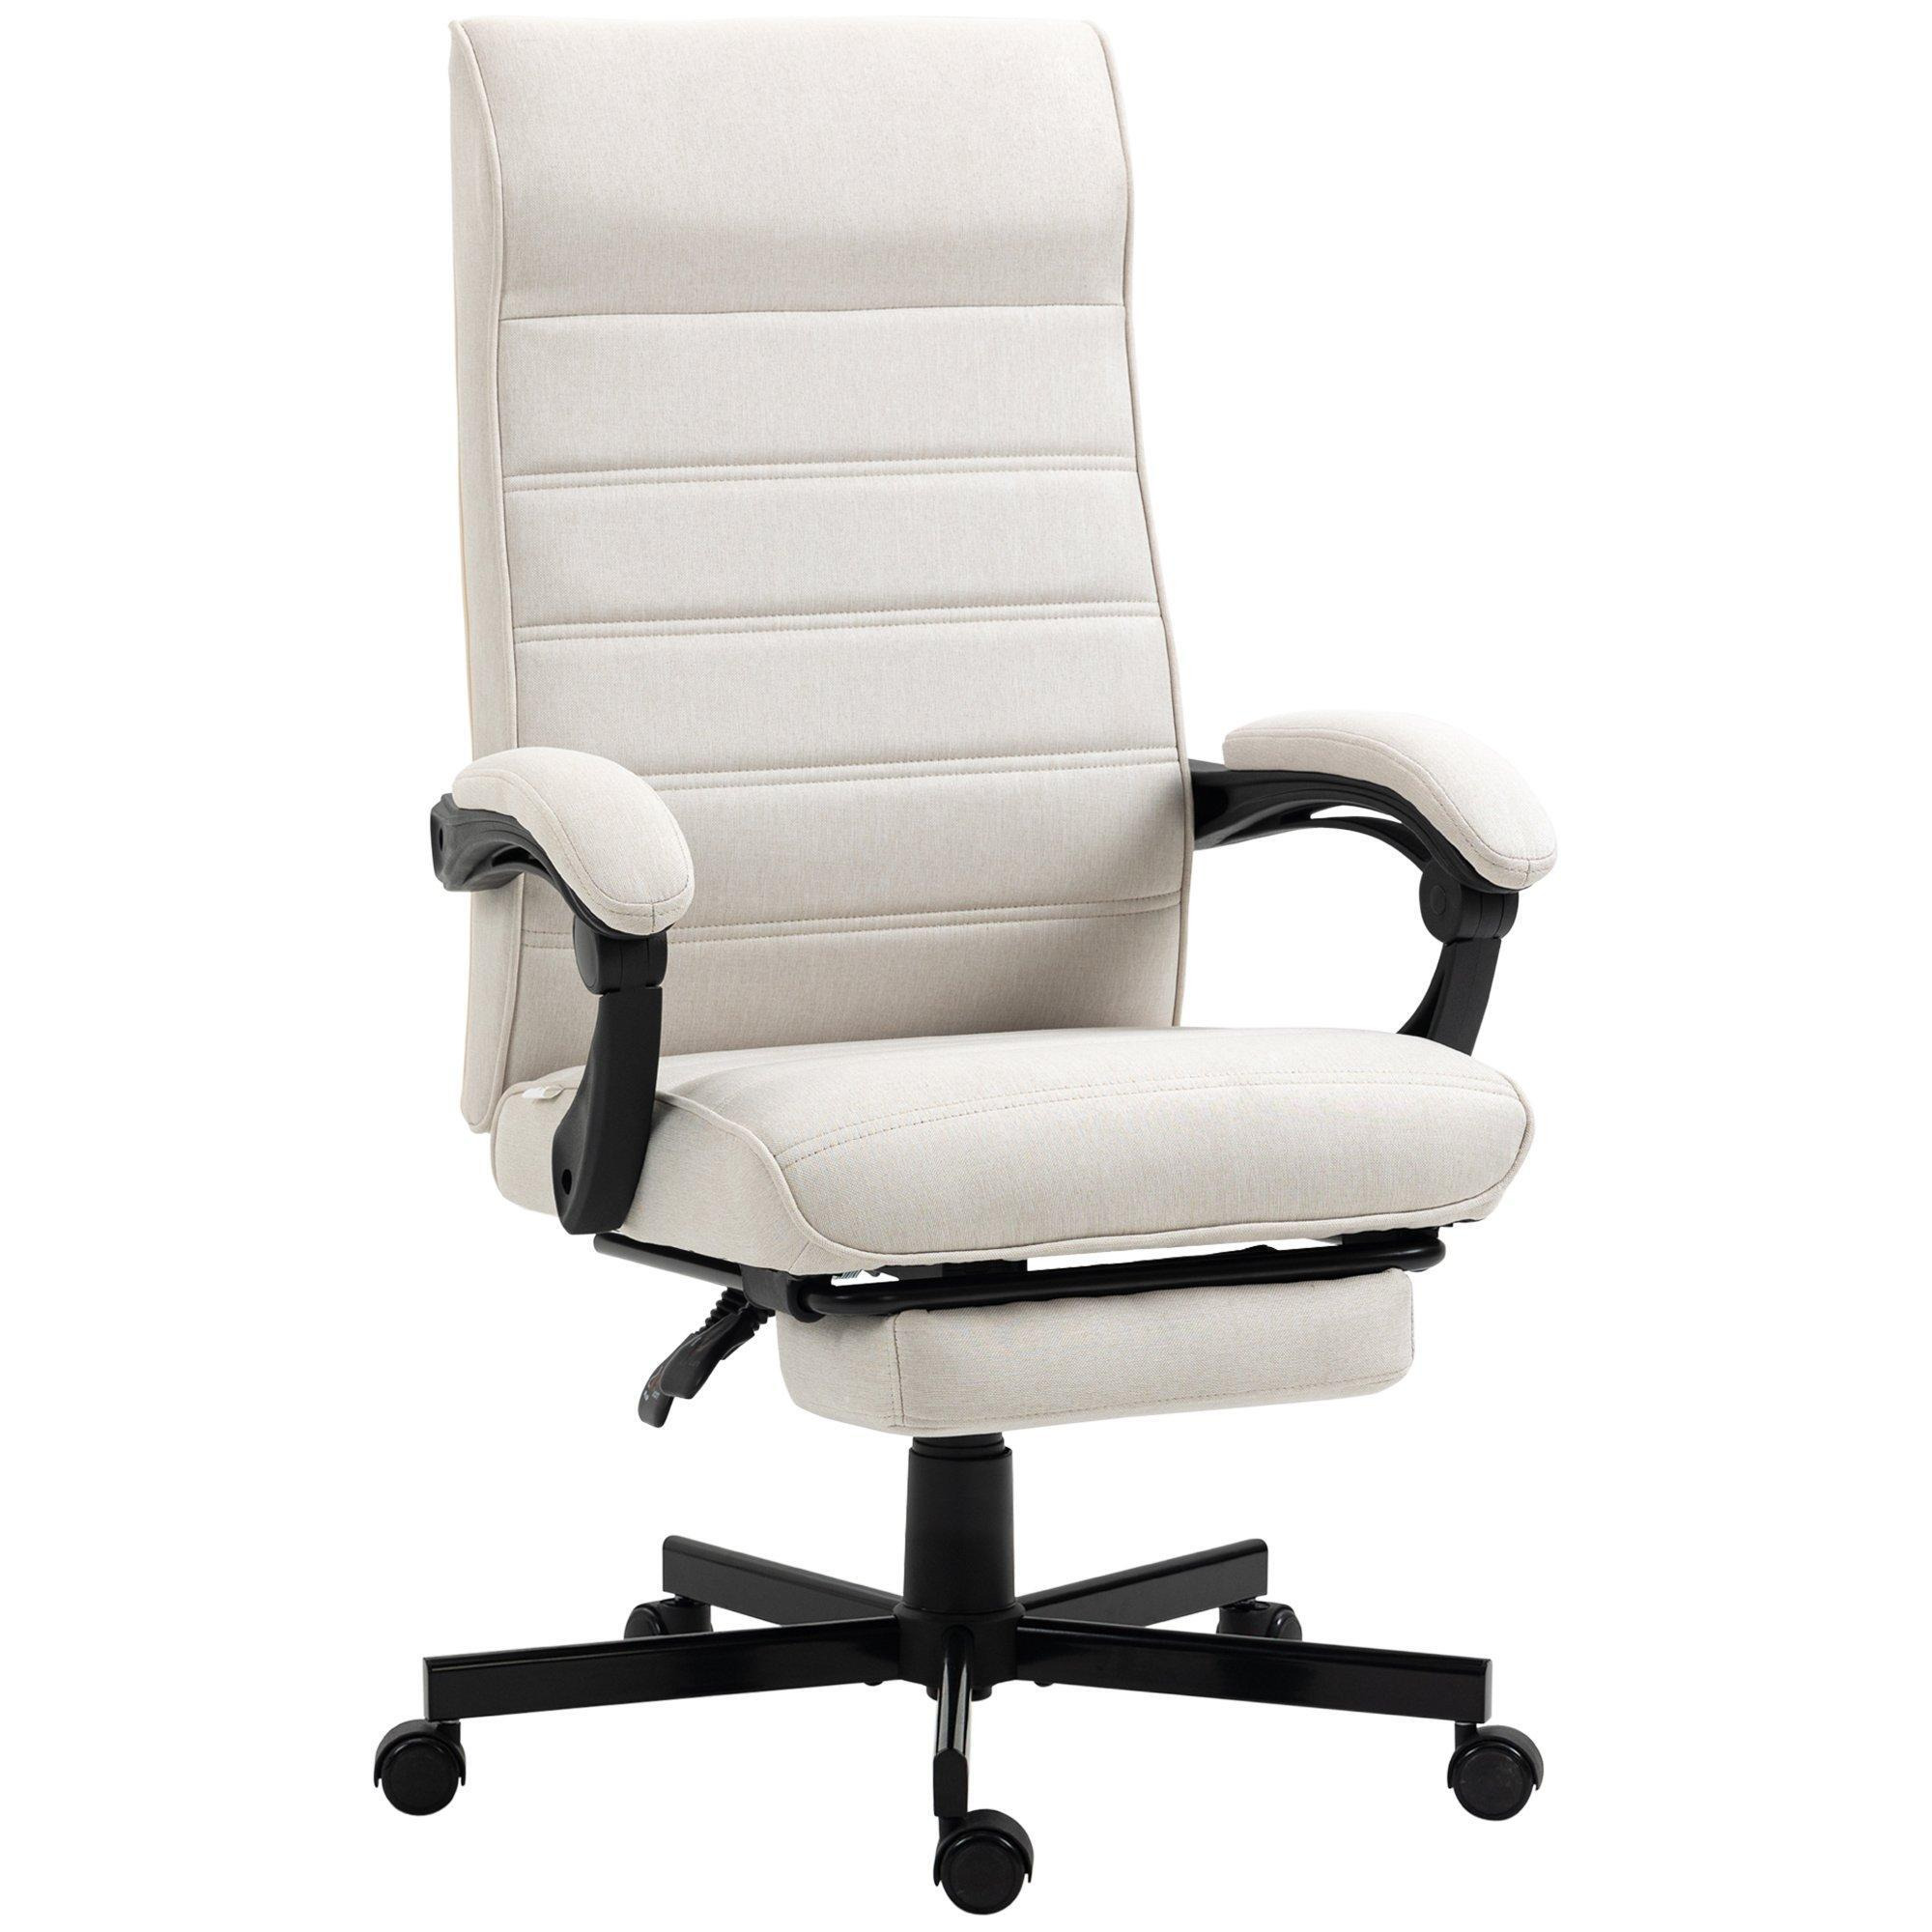 Home Office Chair High Back Reclining Chair for Bedroom Study - image 1